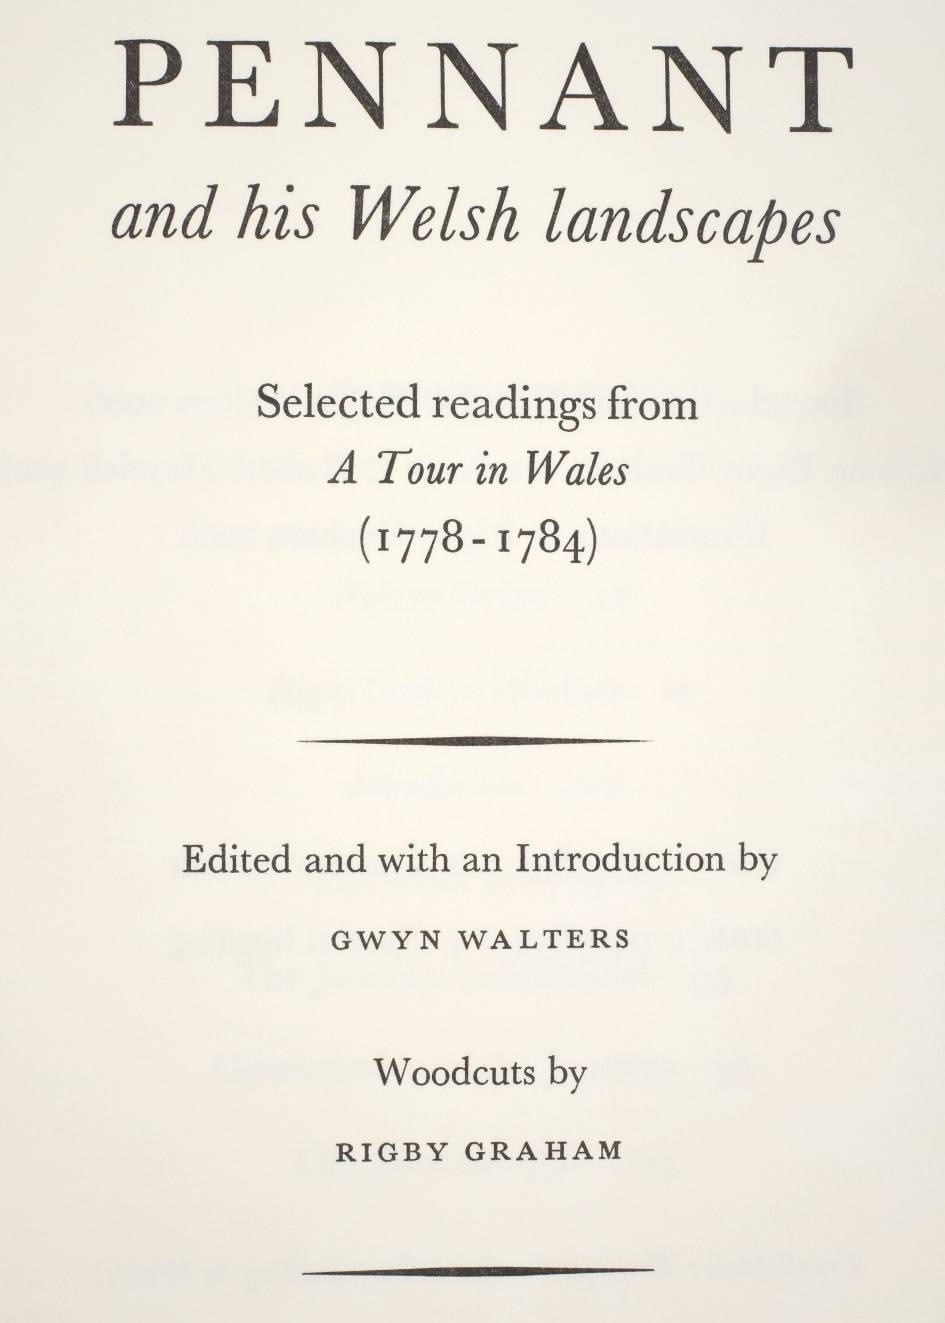 Gregynog Press. Pennant and his Welsh Landscapes, Selected readings from A Tour in Wales (1778- - Image 3 of 9